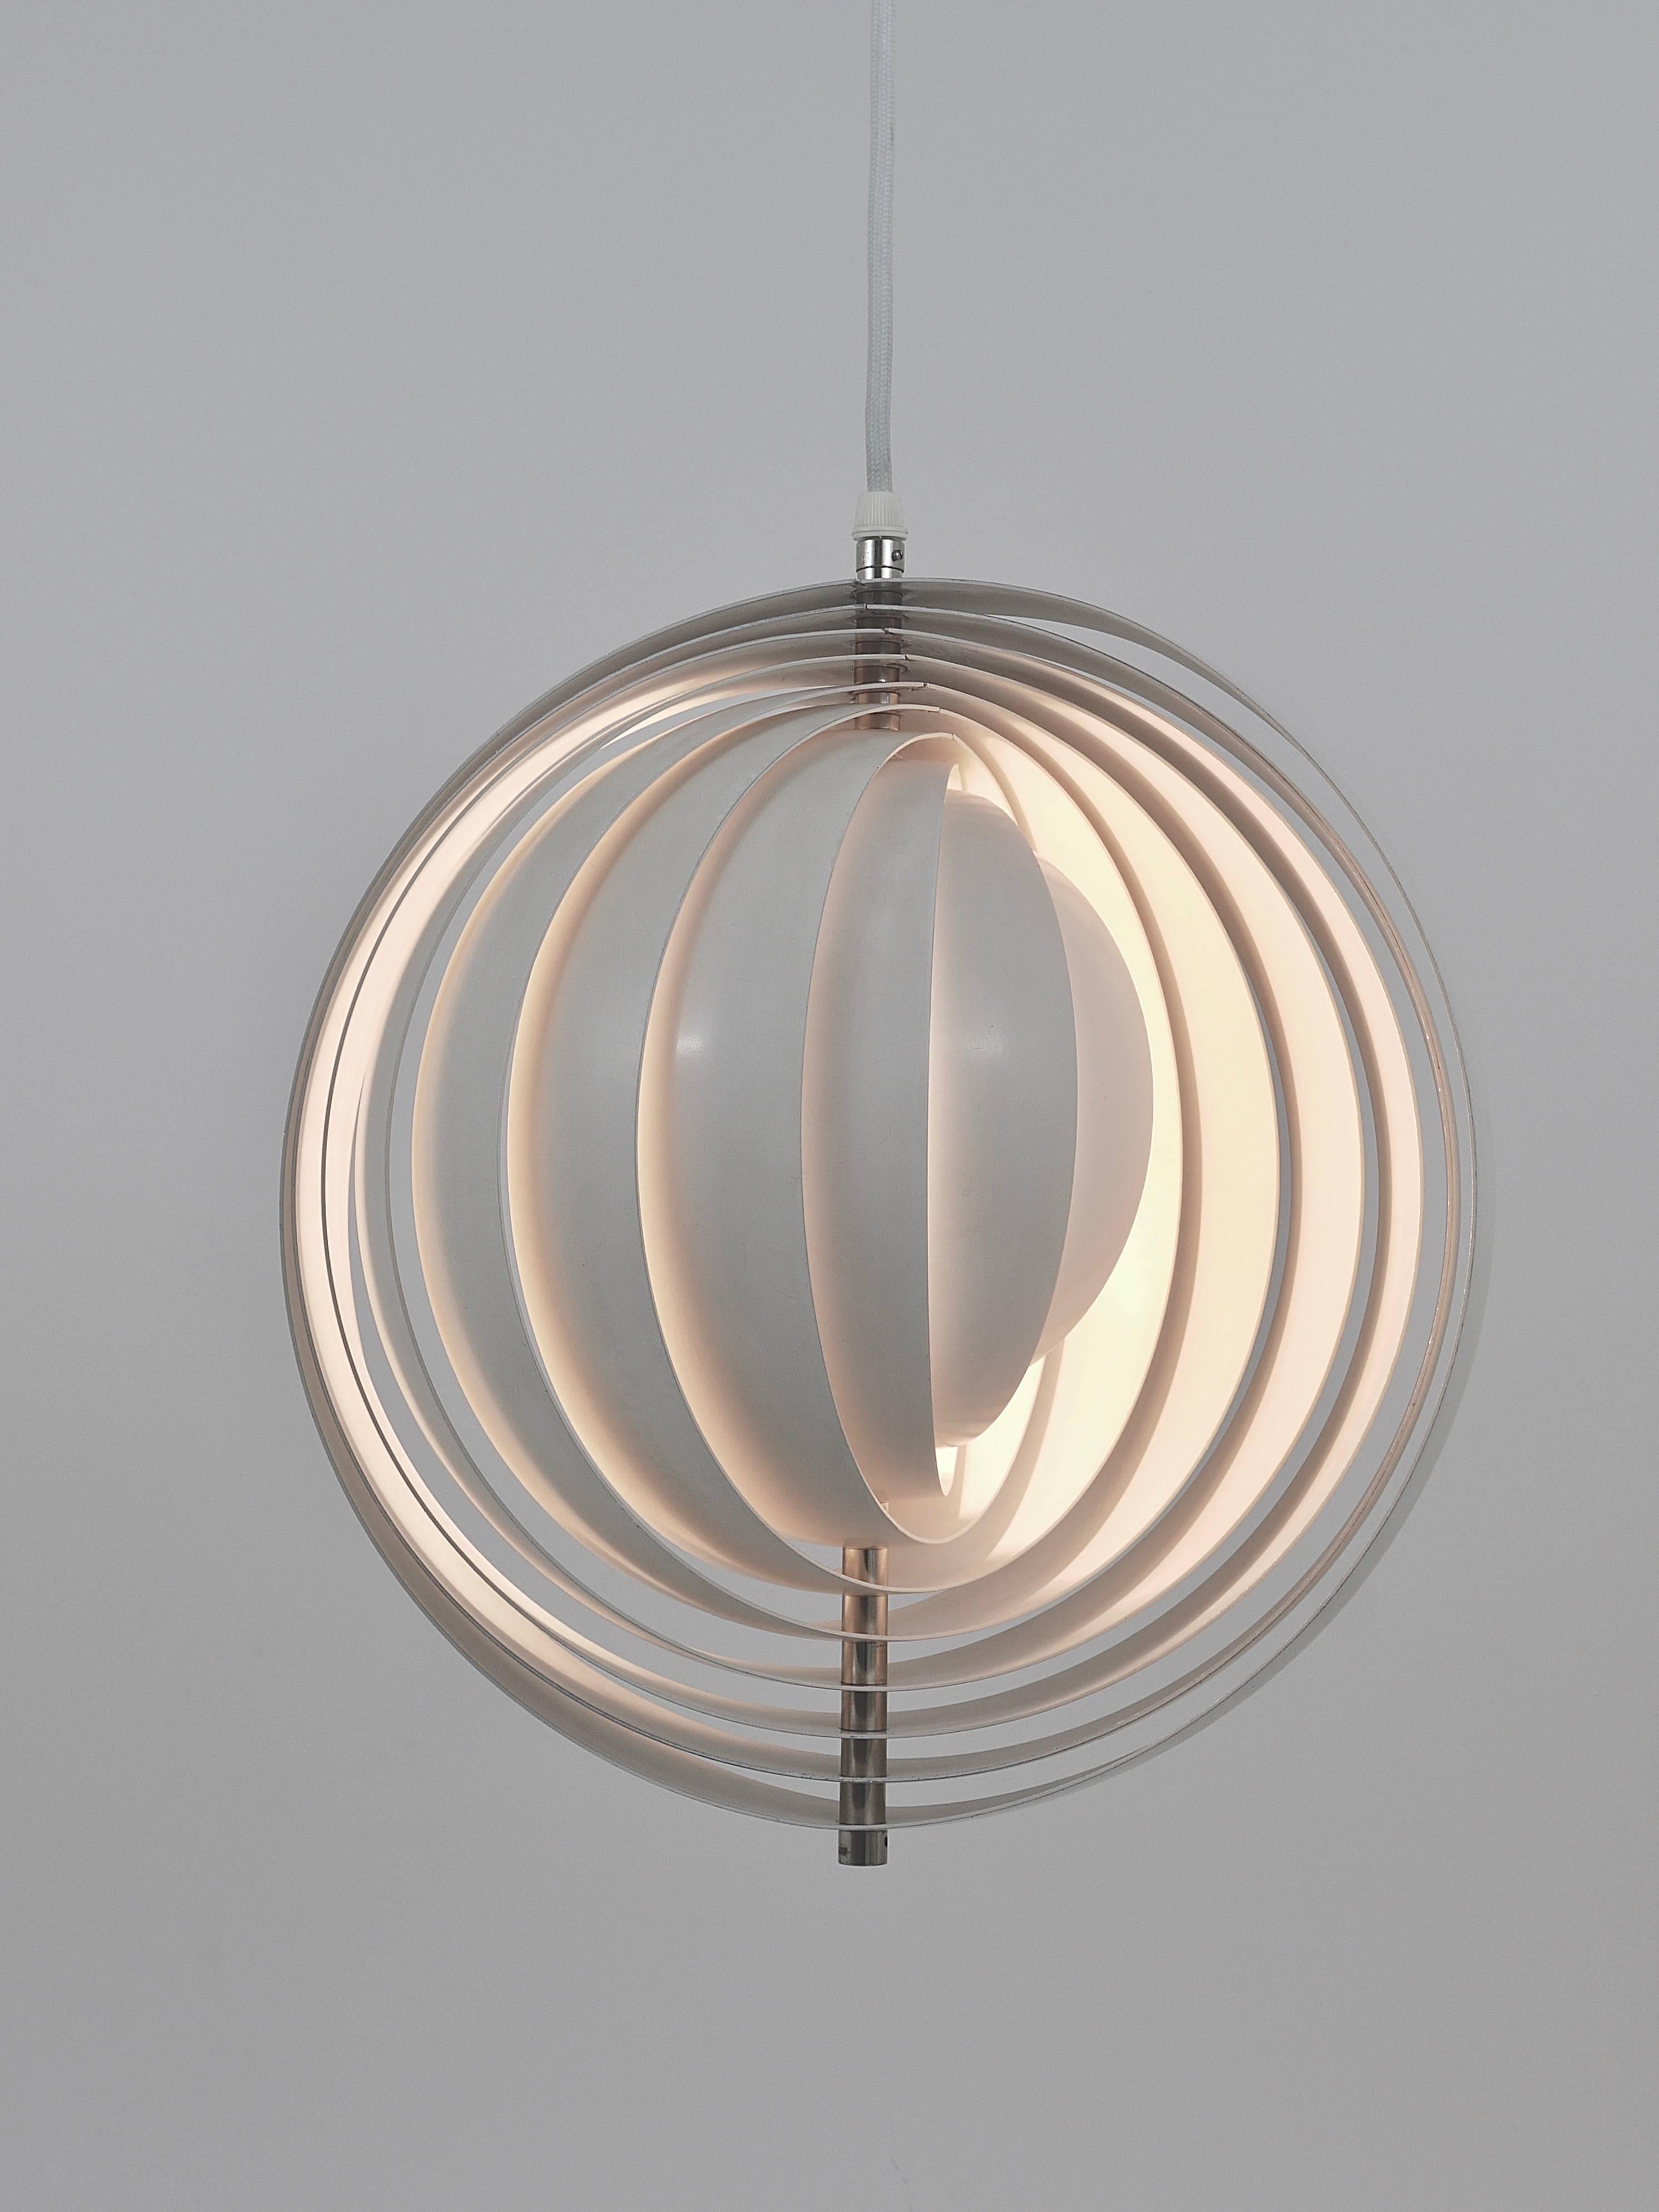 An early model of the iconic Spage Age midcentury moonlamp or visor pendant lamp, designed by Verner Panton in 1960, executed by Louis Pulsen, Denmark. Consists of ten white rotatable enameled metal blade rings around a centrally located bulb. This